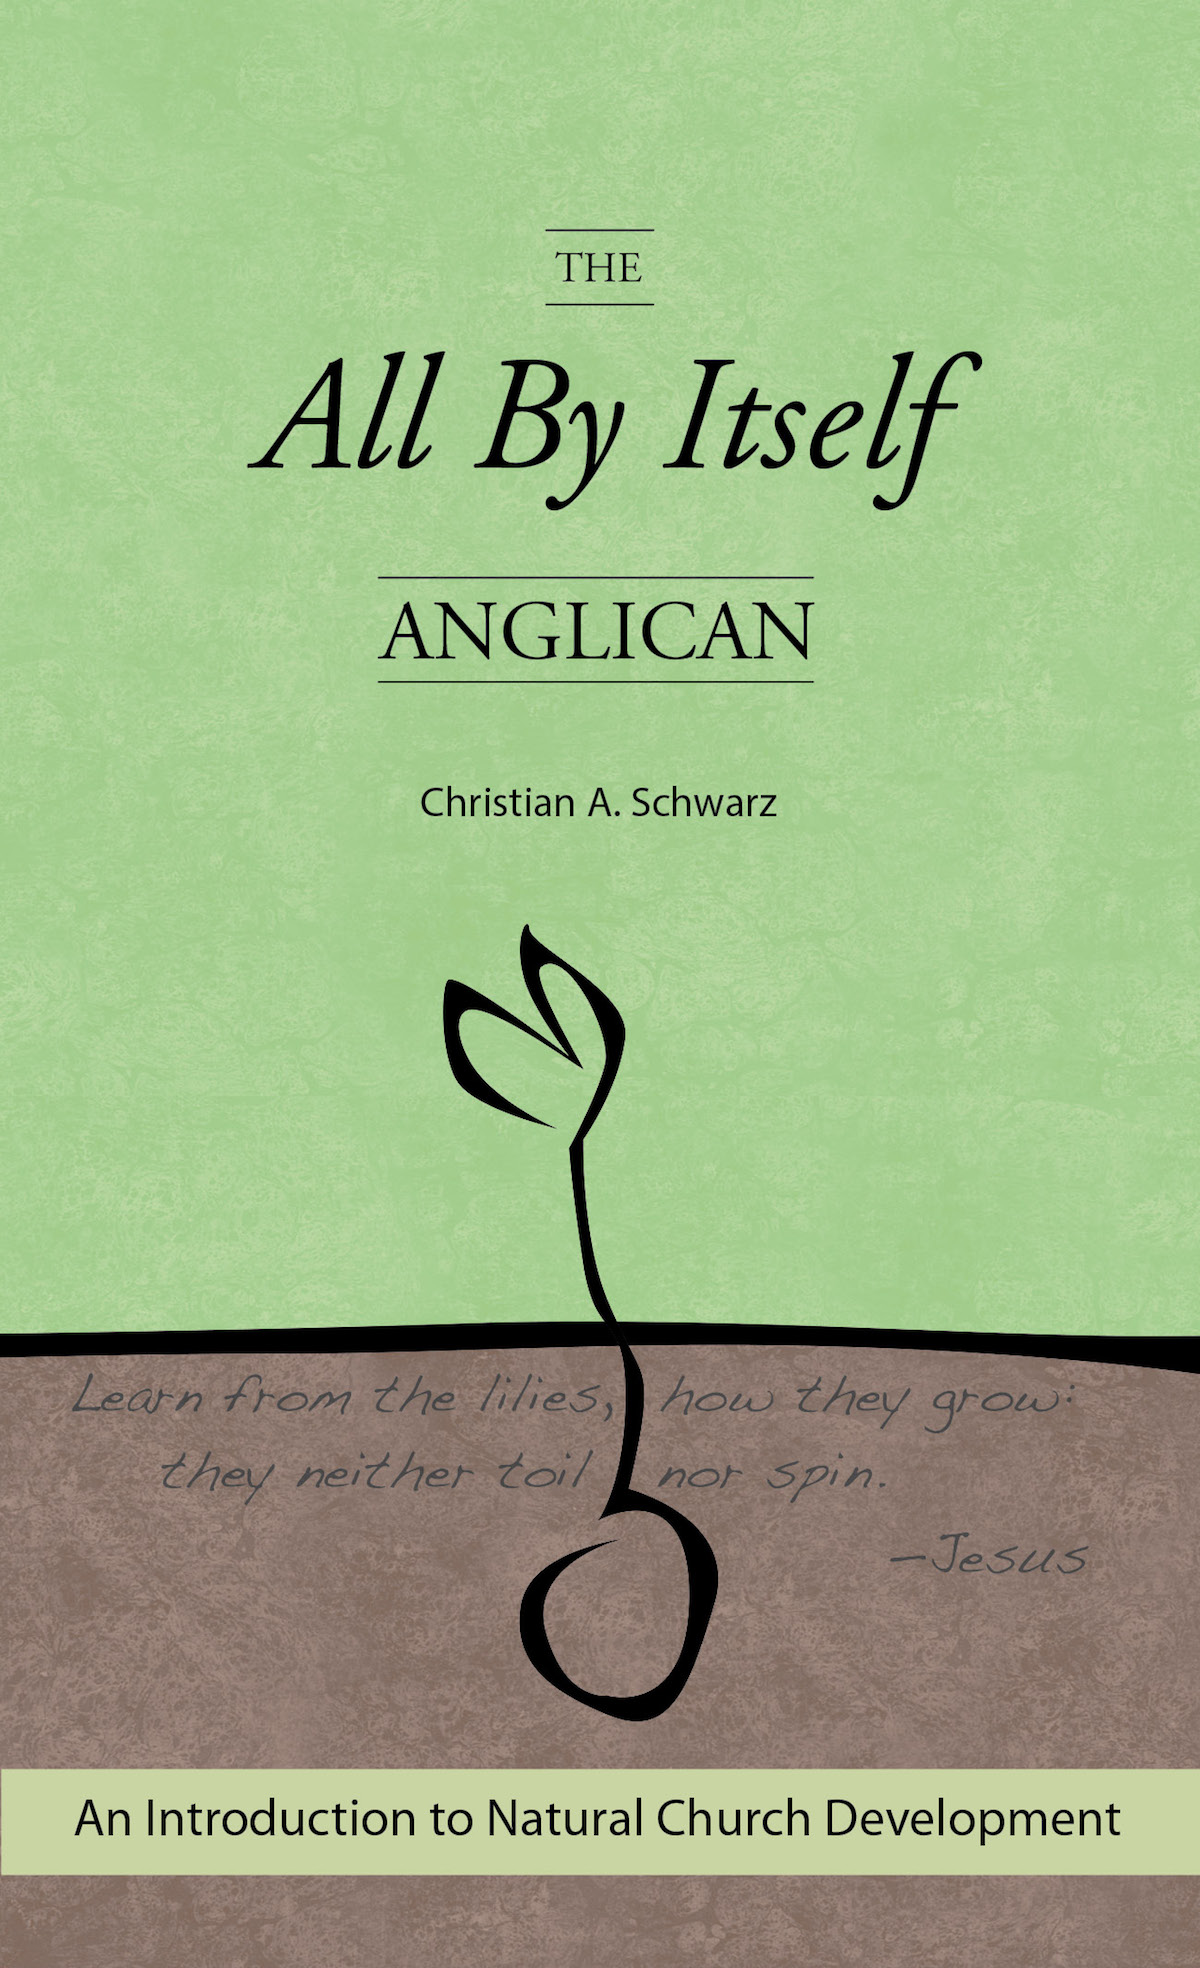 The All By Itself Anglican